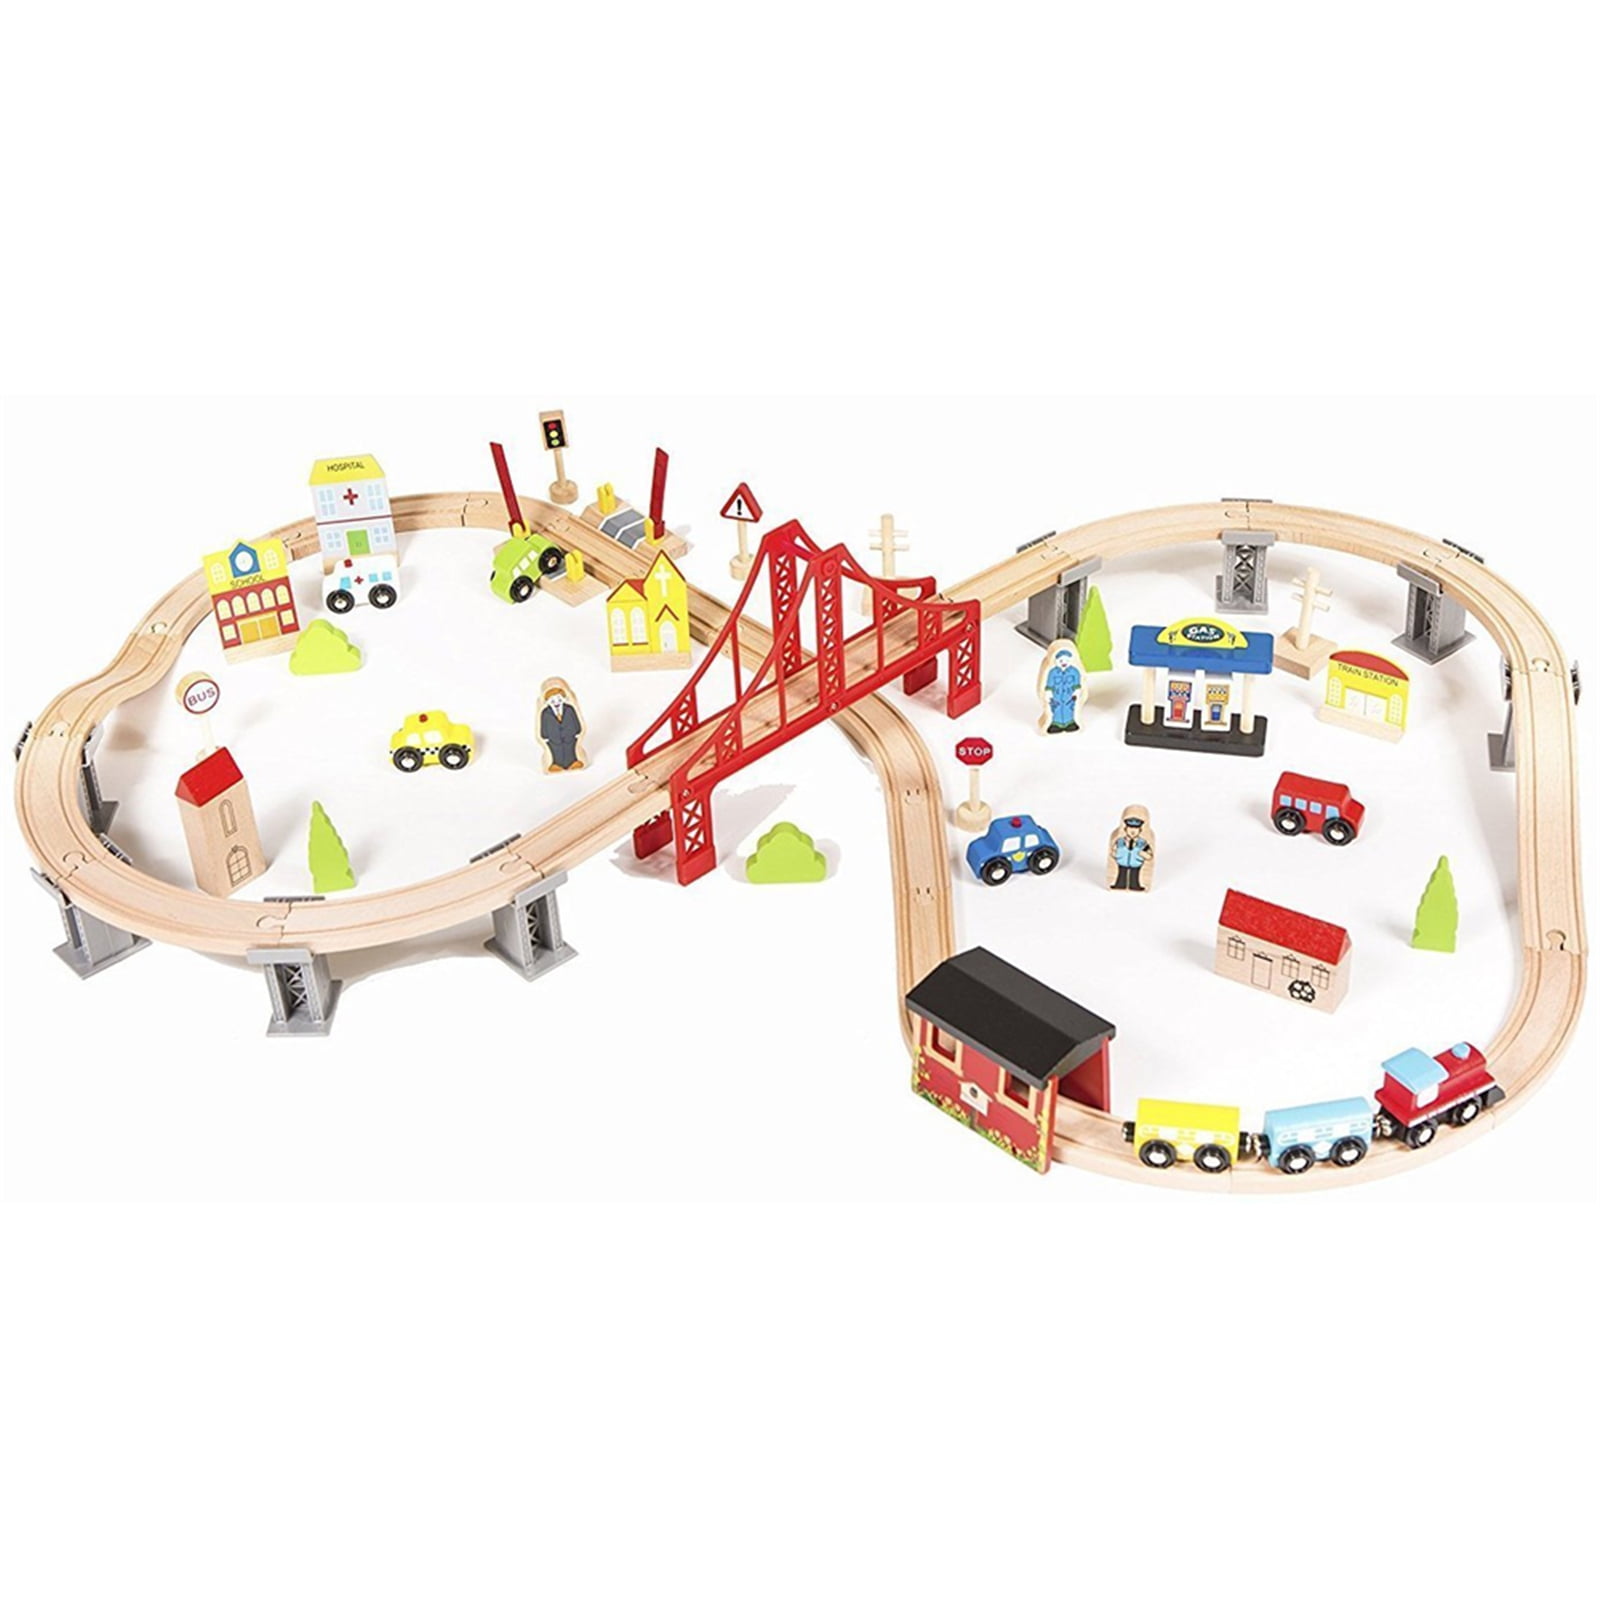 Details about   70pcs Wooden Train Set Learning Toy Kids Children Fun Road Crossing Track... 